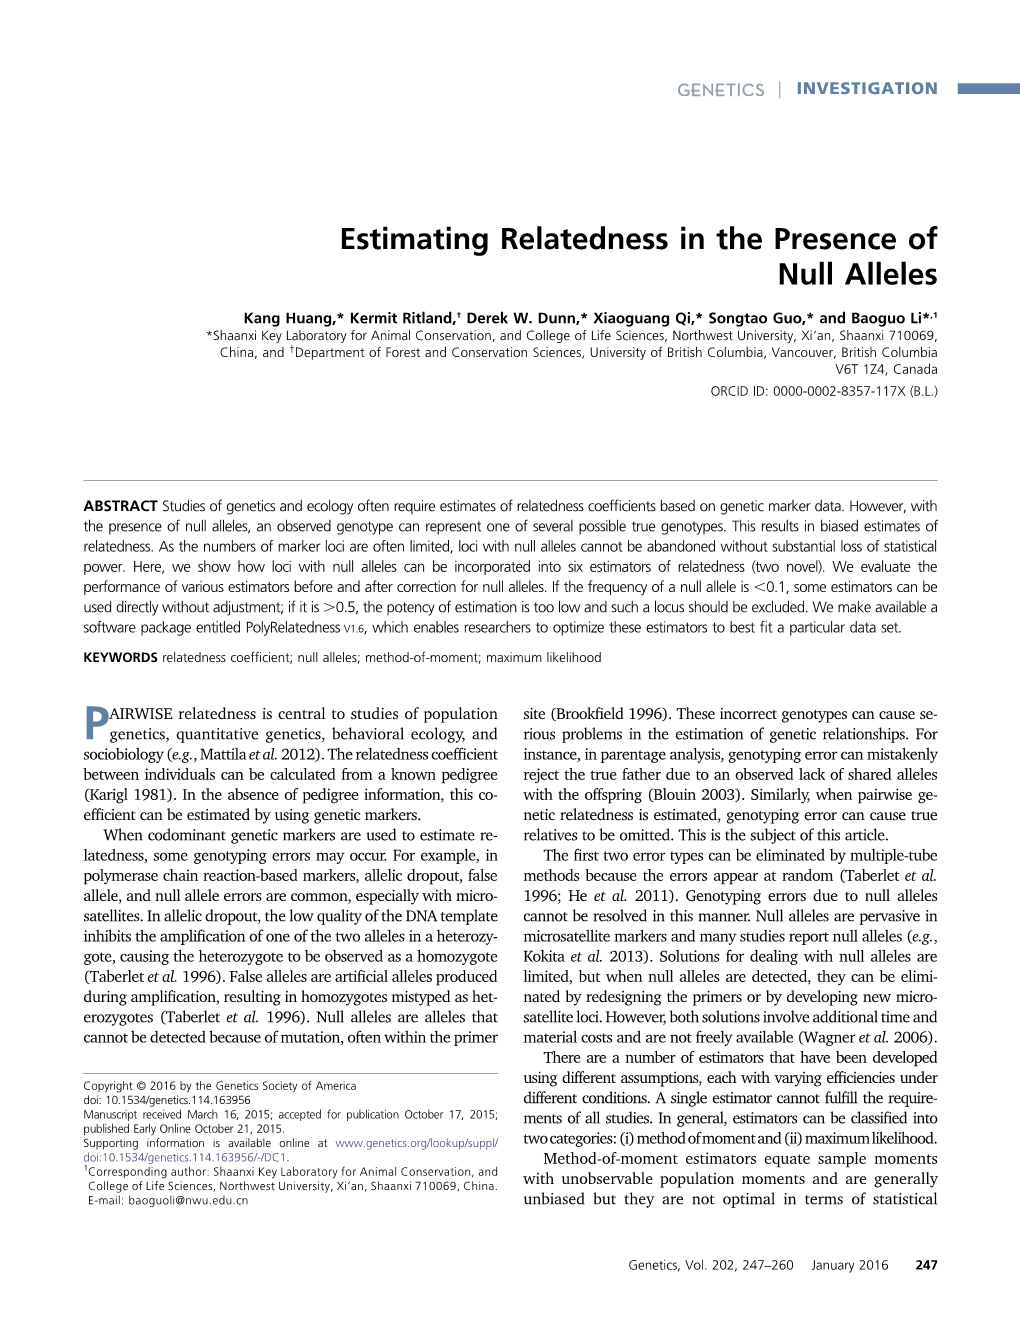 Estimating Relatedness in the Presence of Null Alleles